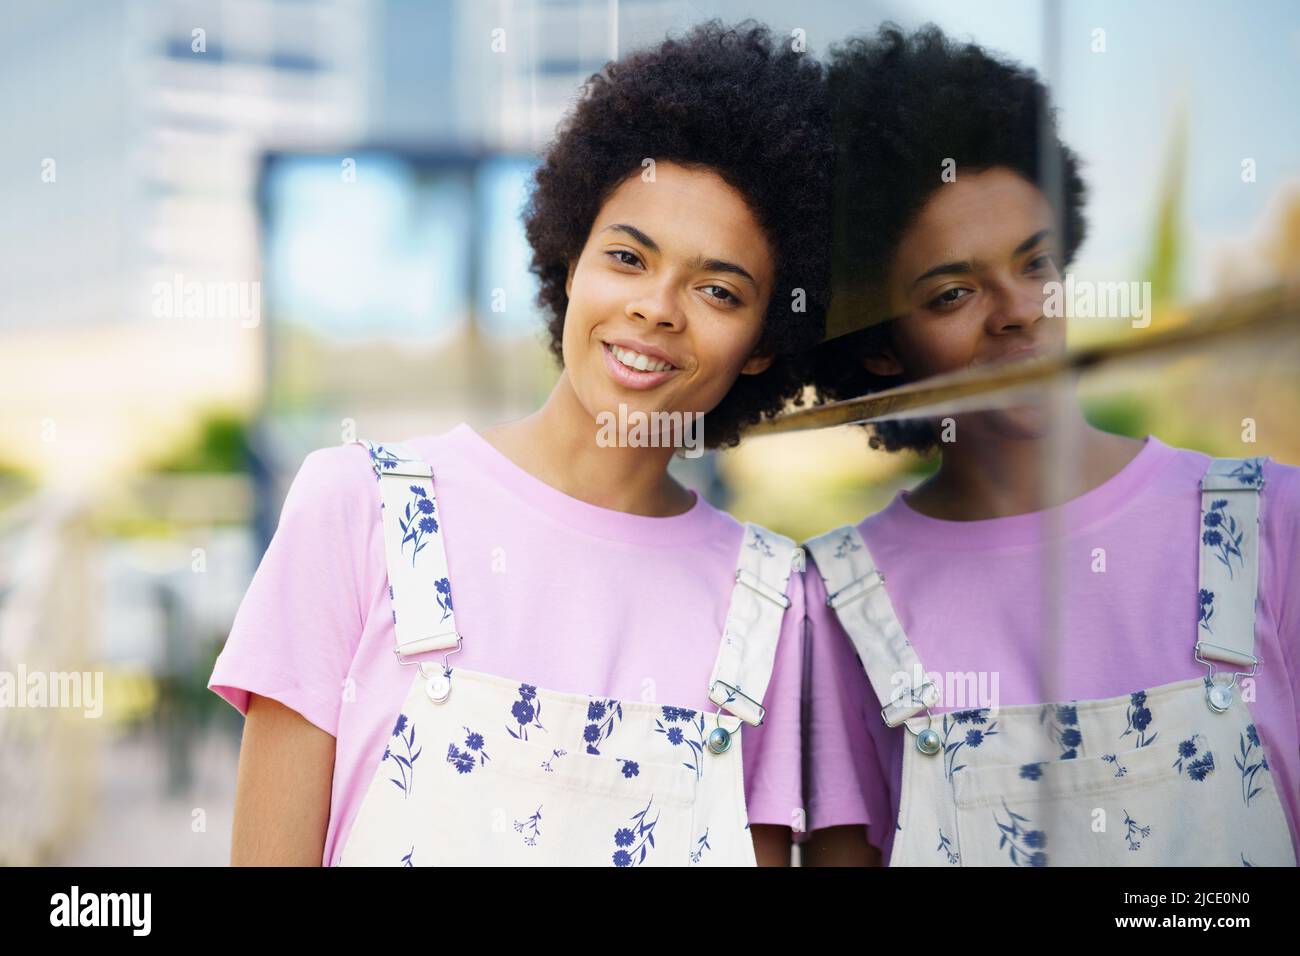 Optimistic African American woman in casual clothes looking at the camera smiling. Stock Photo